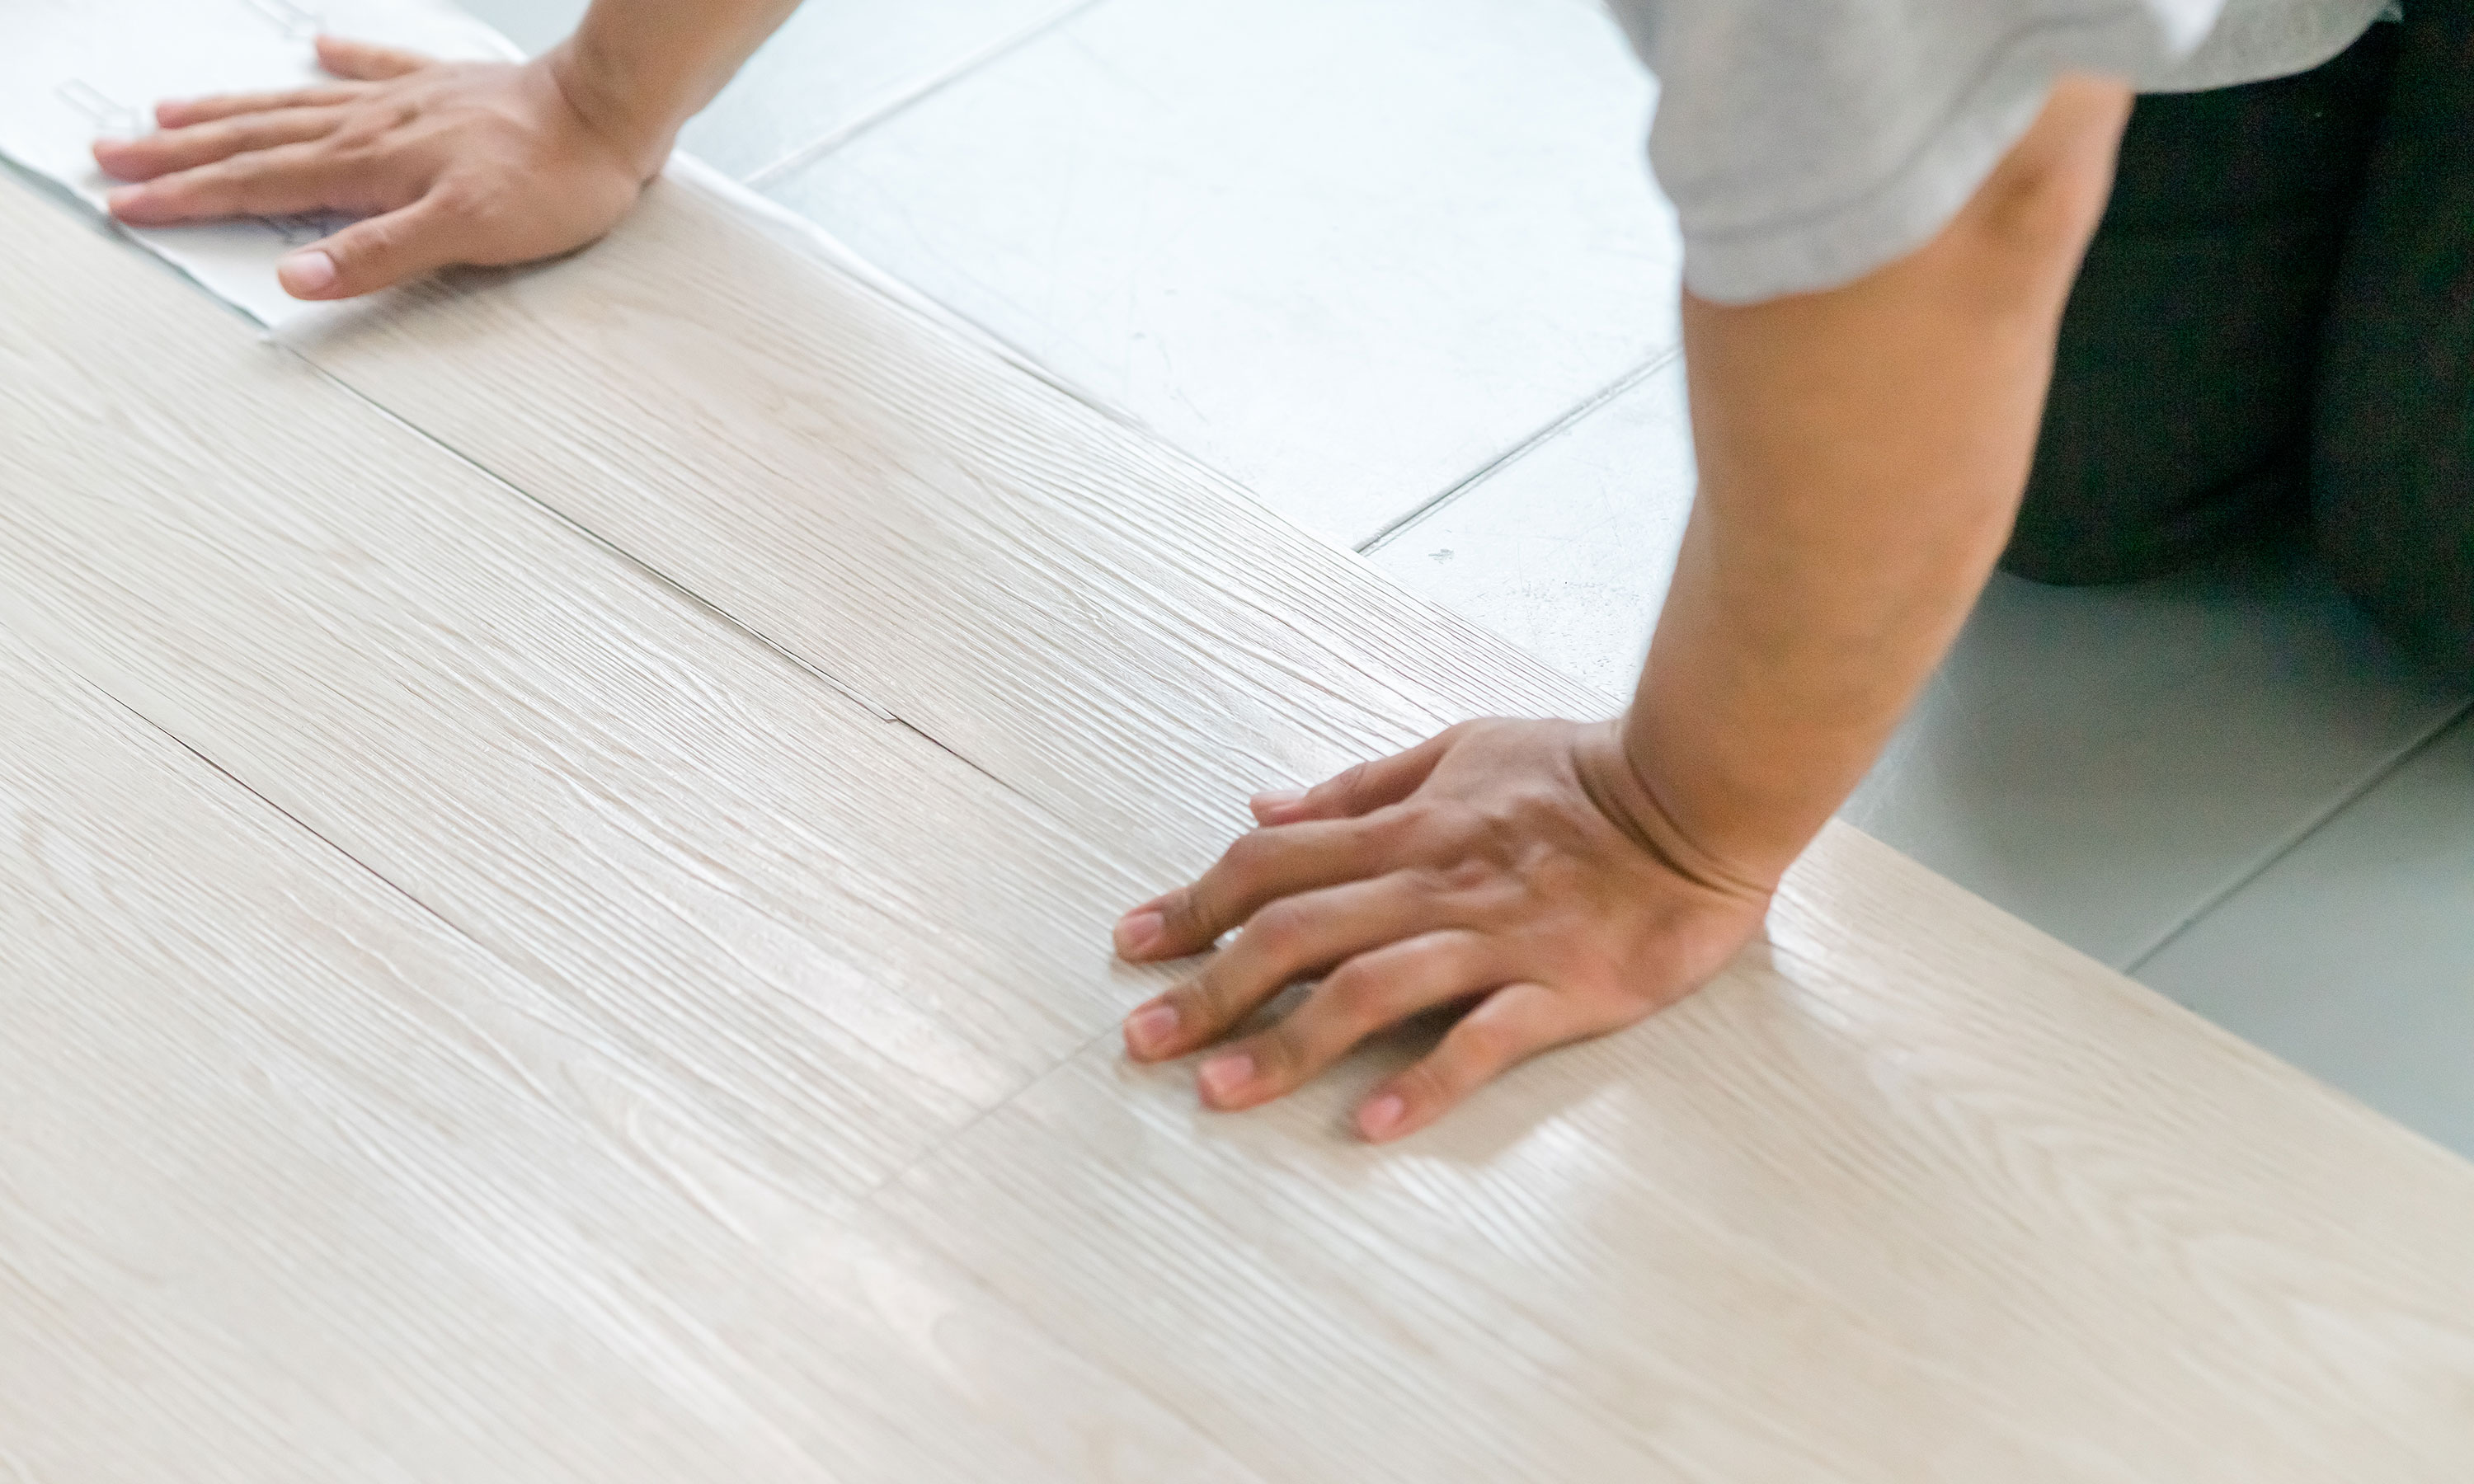 How To Install Vinyl Plank Flooring, Can A Beginner Install Vinyl Plank Flooring